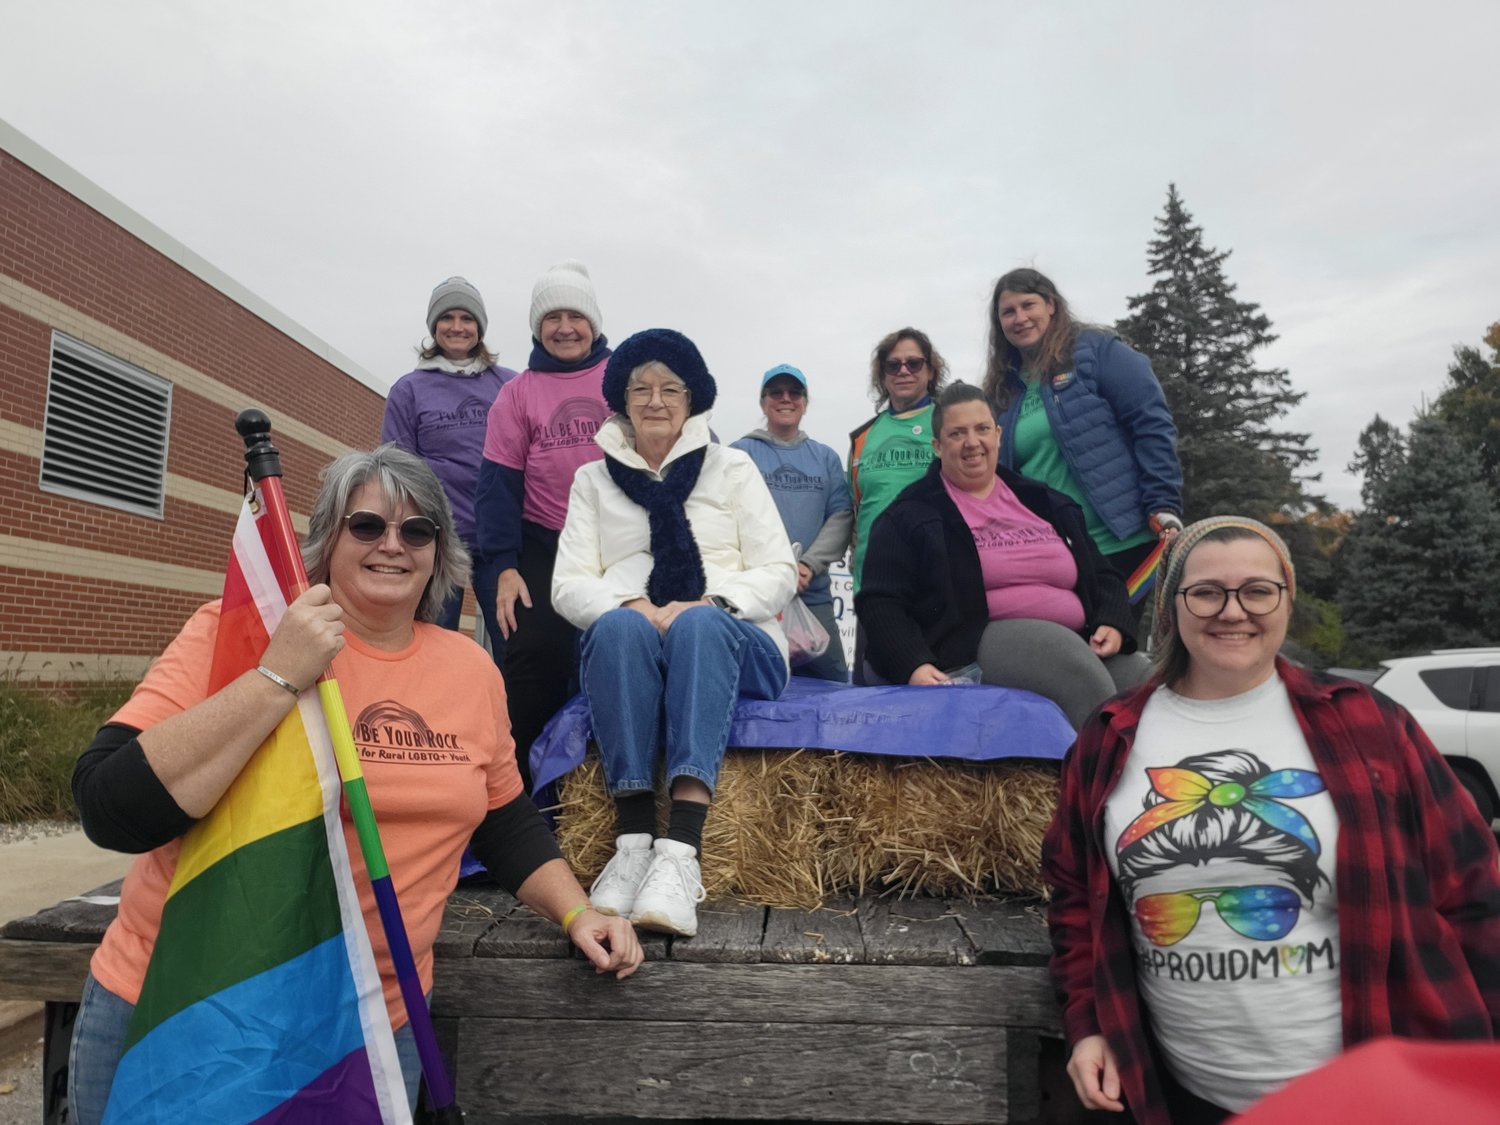 Christine Terpening (left), president of I’ll Be Your Rock, and Vice President Kallie Strouse, pose with the rest of the adults who rode on the organization’s float in the Maple Valley School District’s homecoming parade Friday (Oct. 14).